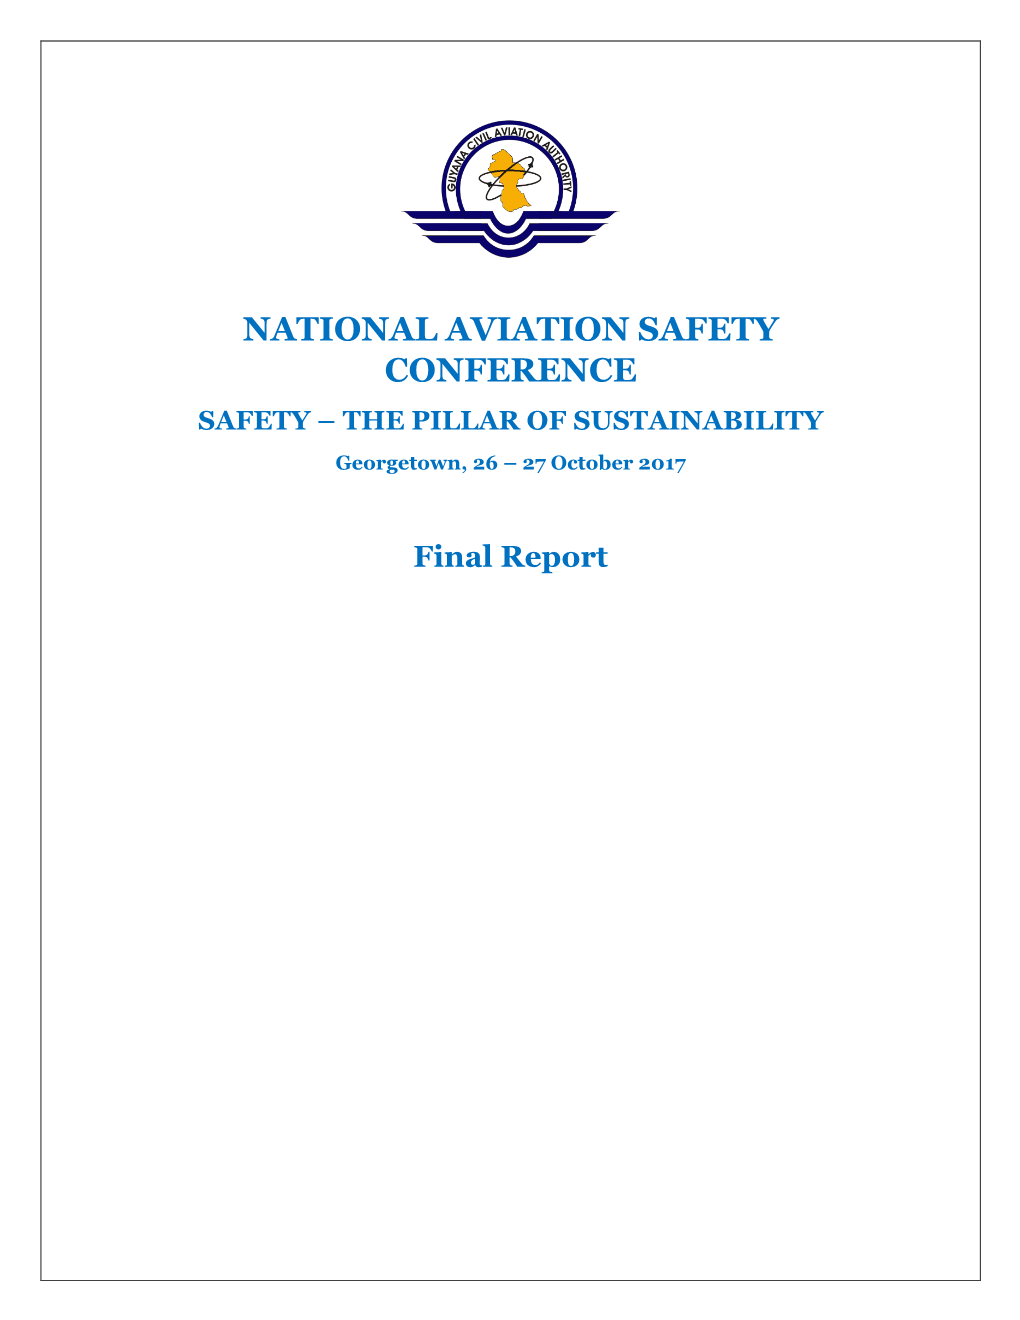 National Aviation Safety Conference 2017 Final Report